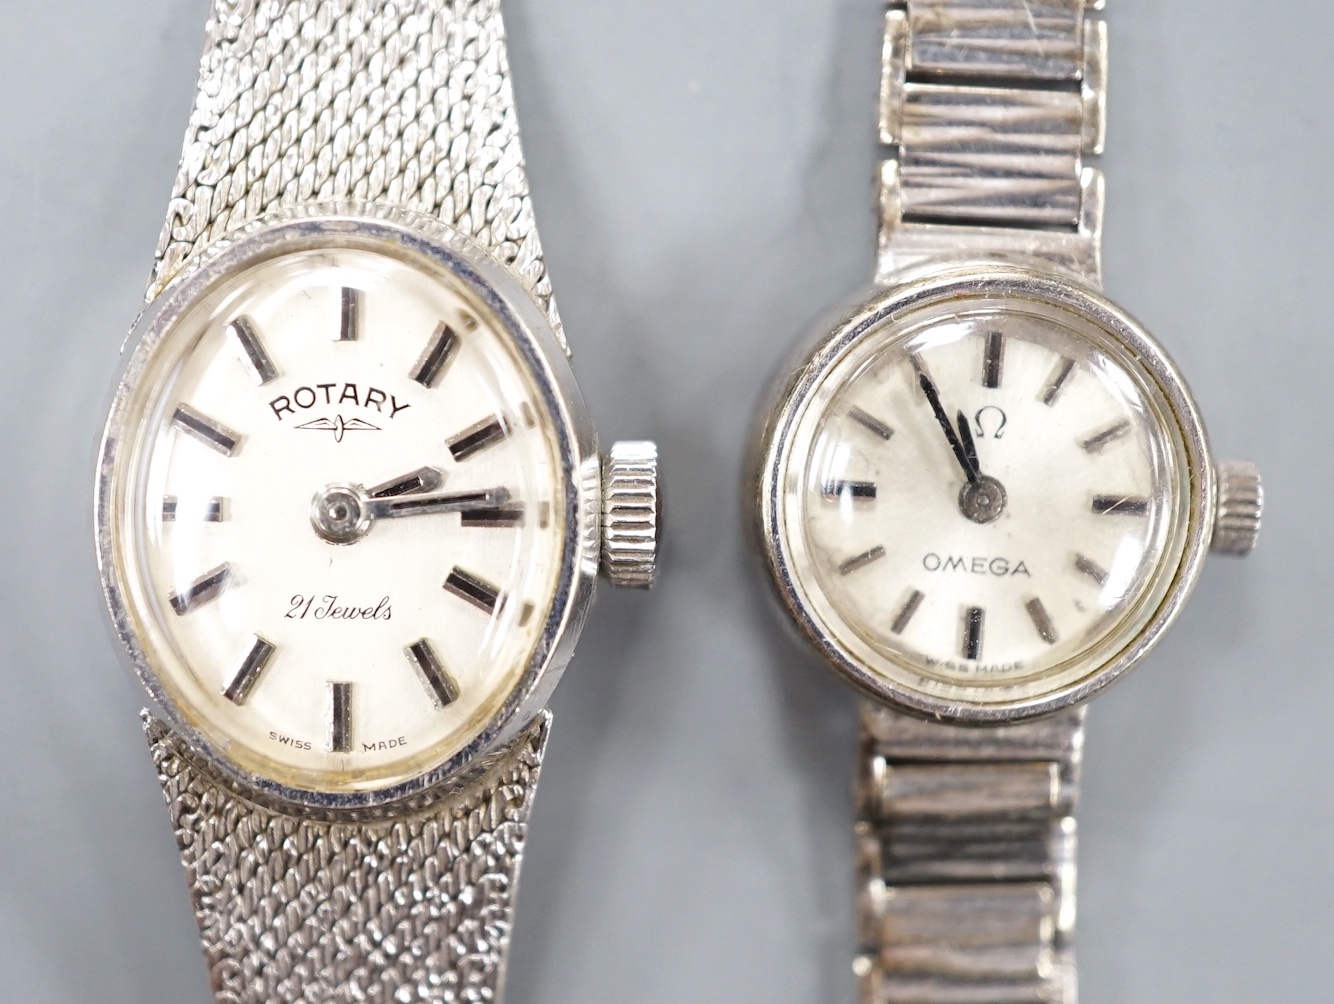 A lady's 9ct white gold Rotary manual wind wrist watch and a similar Omega wrist watch, gross 31.5 grams.